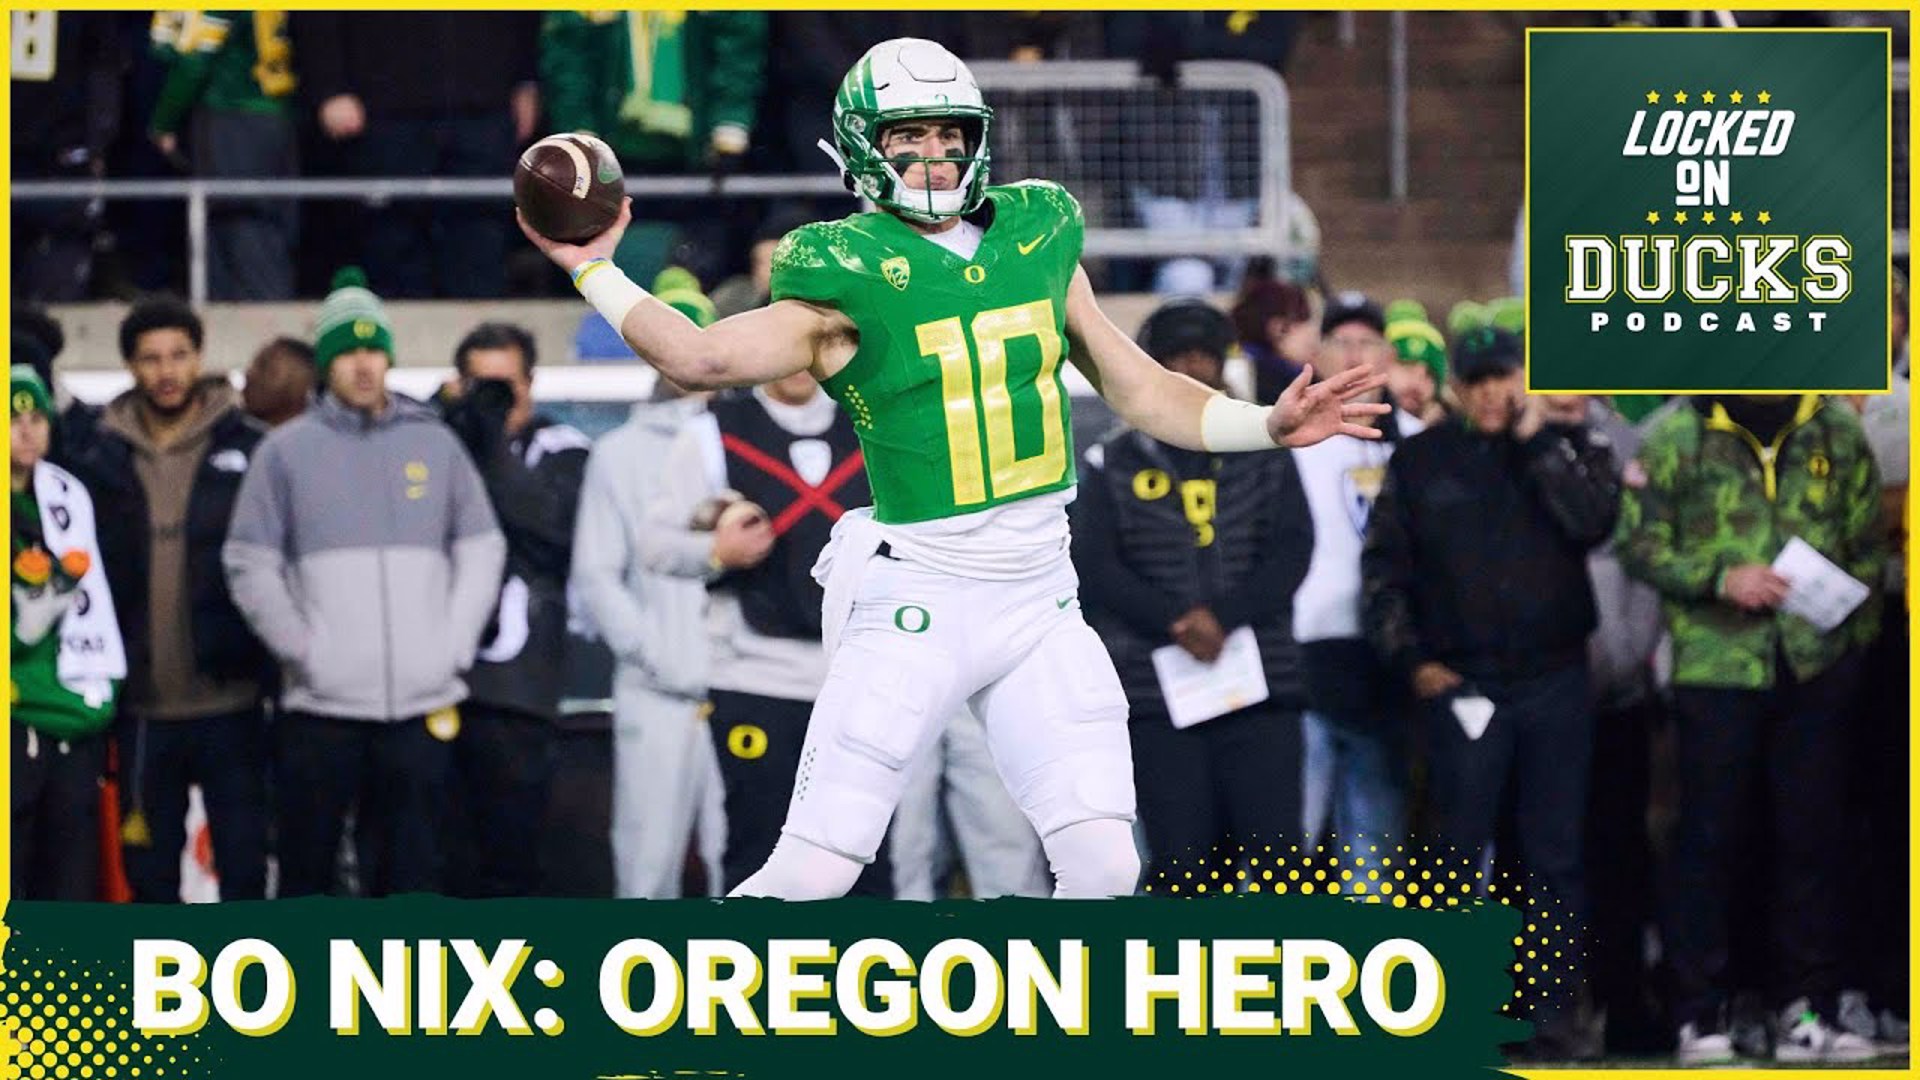 Oregon quarterback Bo Nix was clearly hobbled, but he played anyway, leading the Ducks to a critical 20-17 win against a Top 10 opponent.